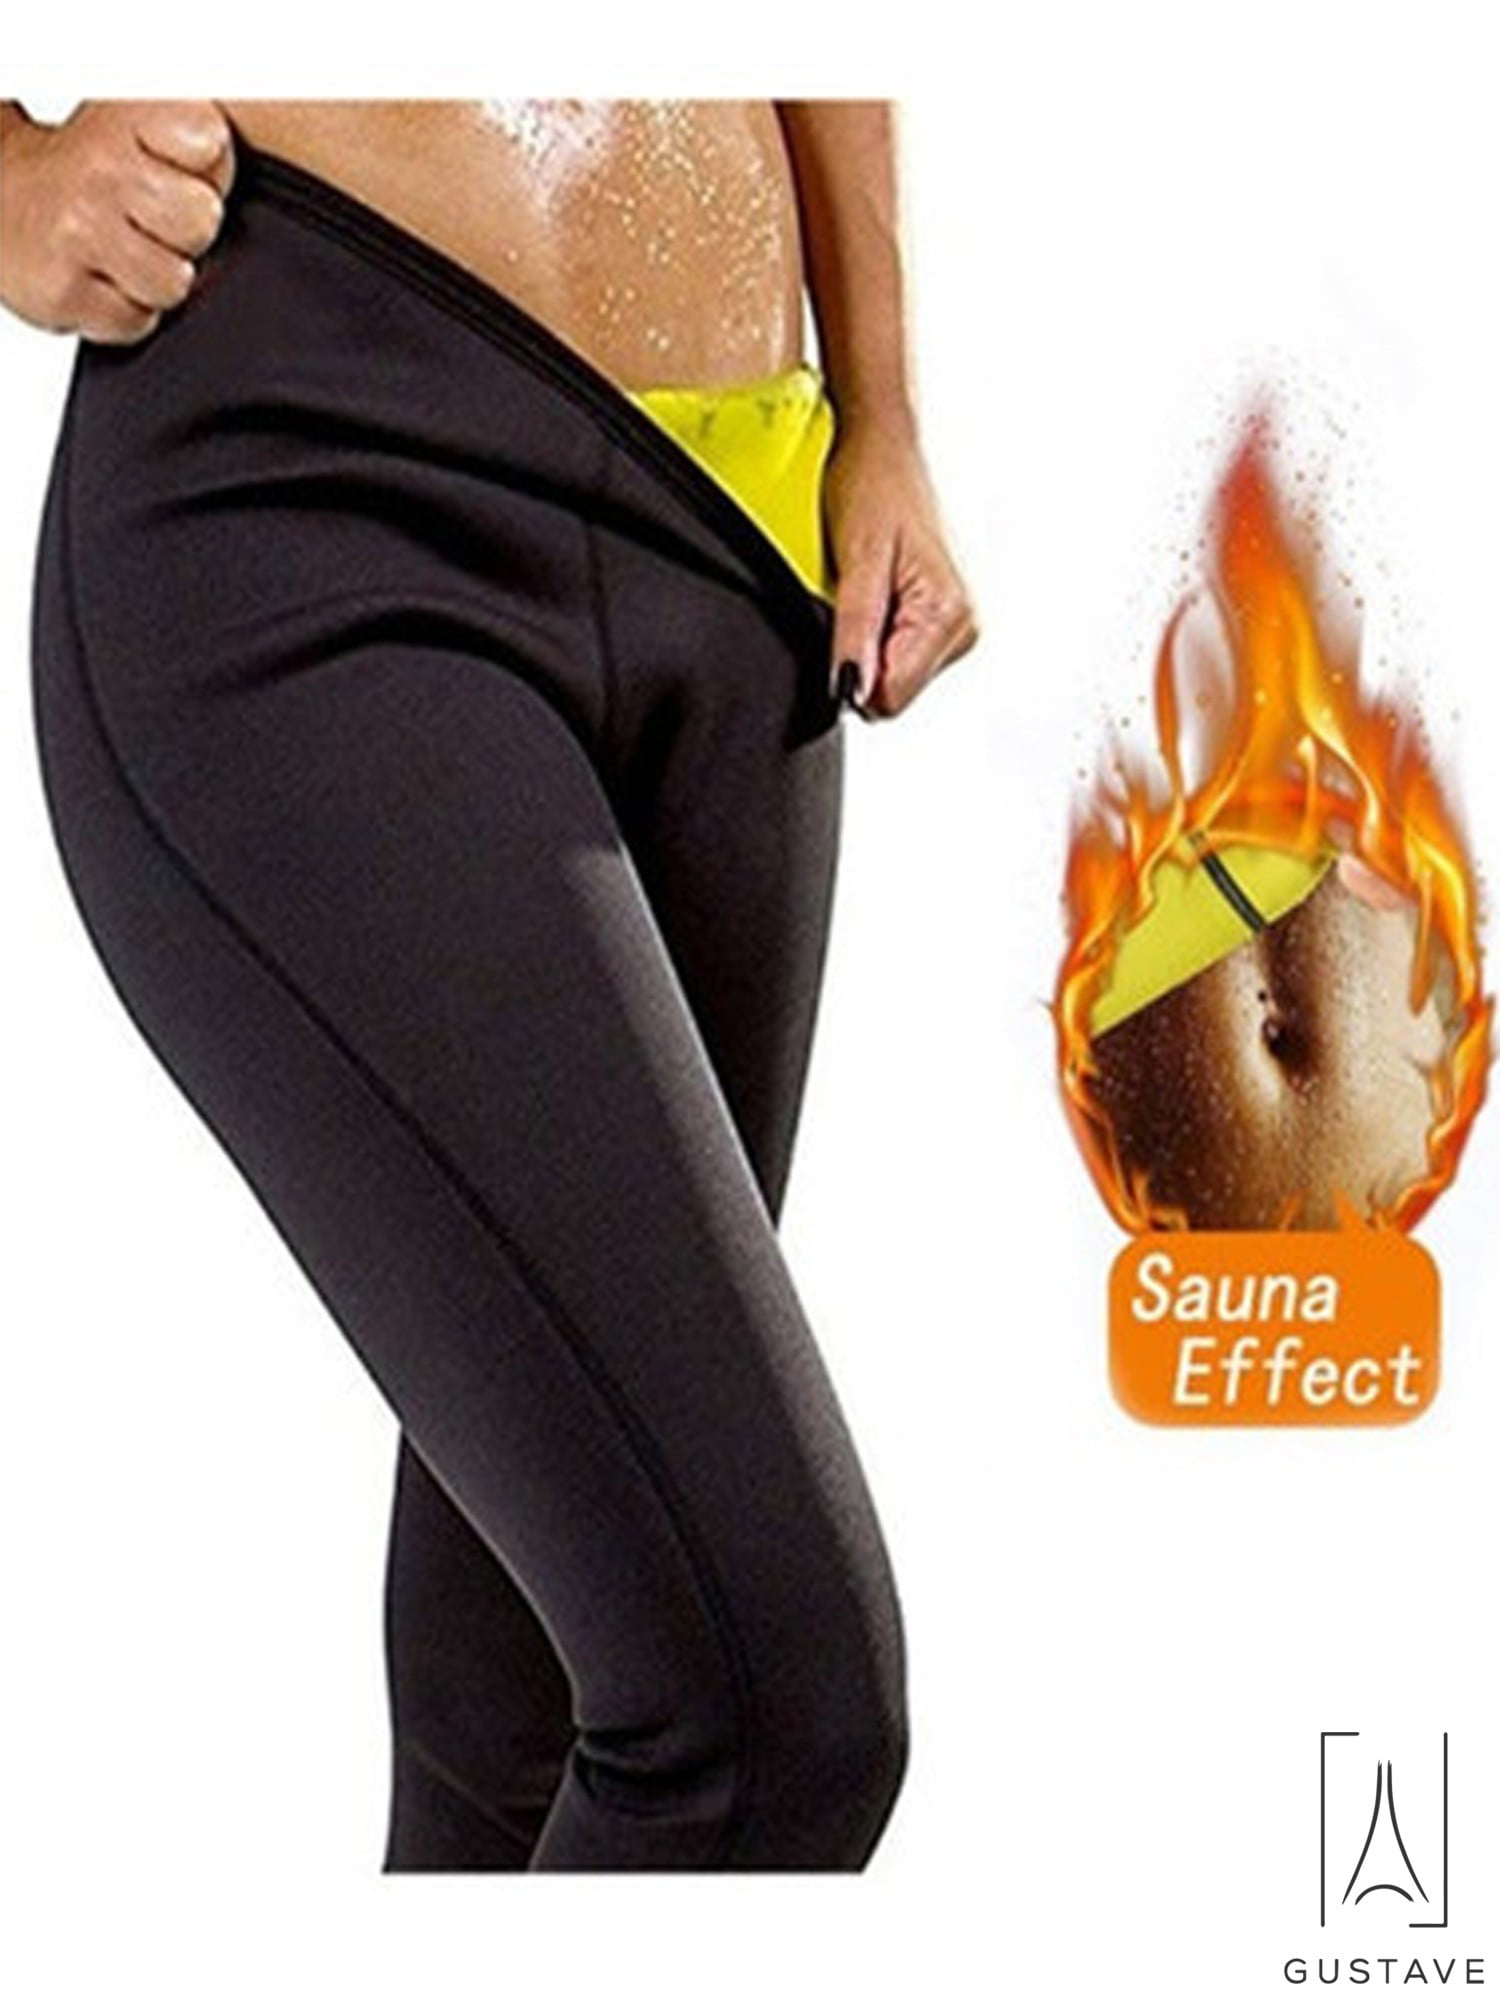 Superstretch Neoprene Thermo Shapers Women Sauna Pants for Slimming and Weight Loss S-3XL 